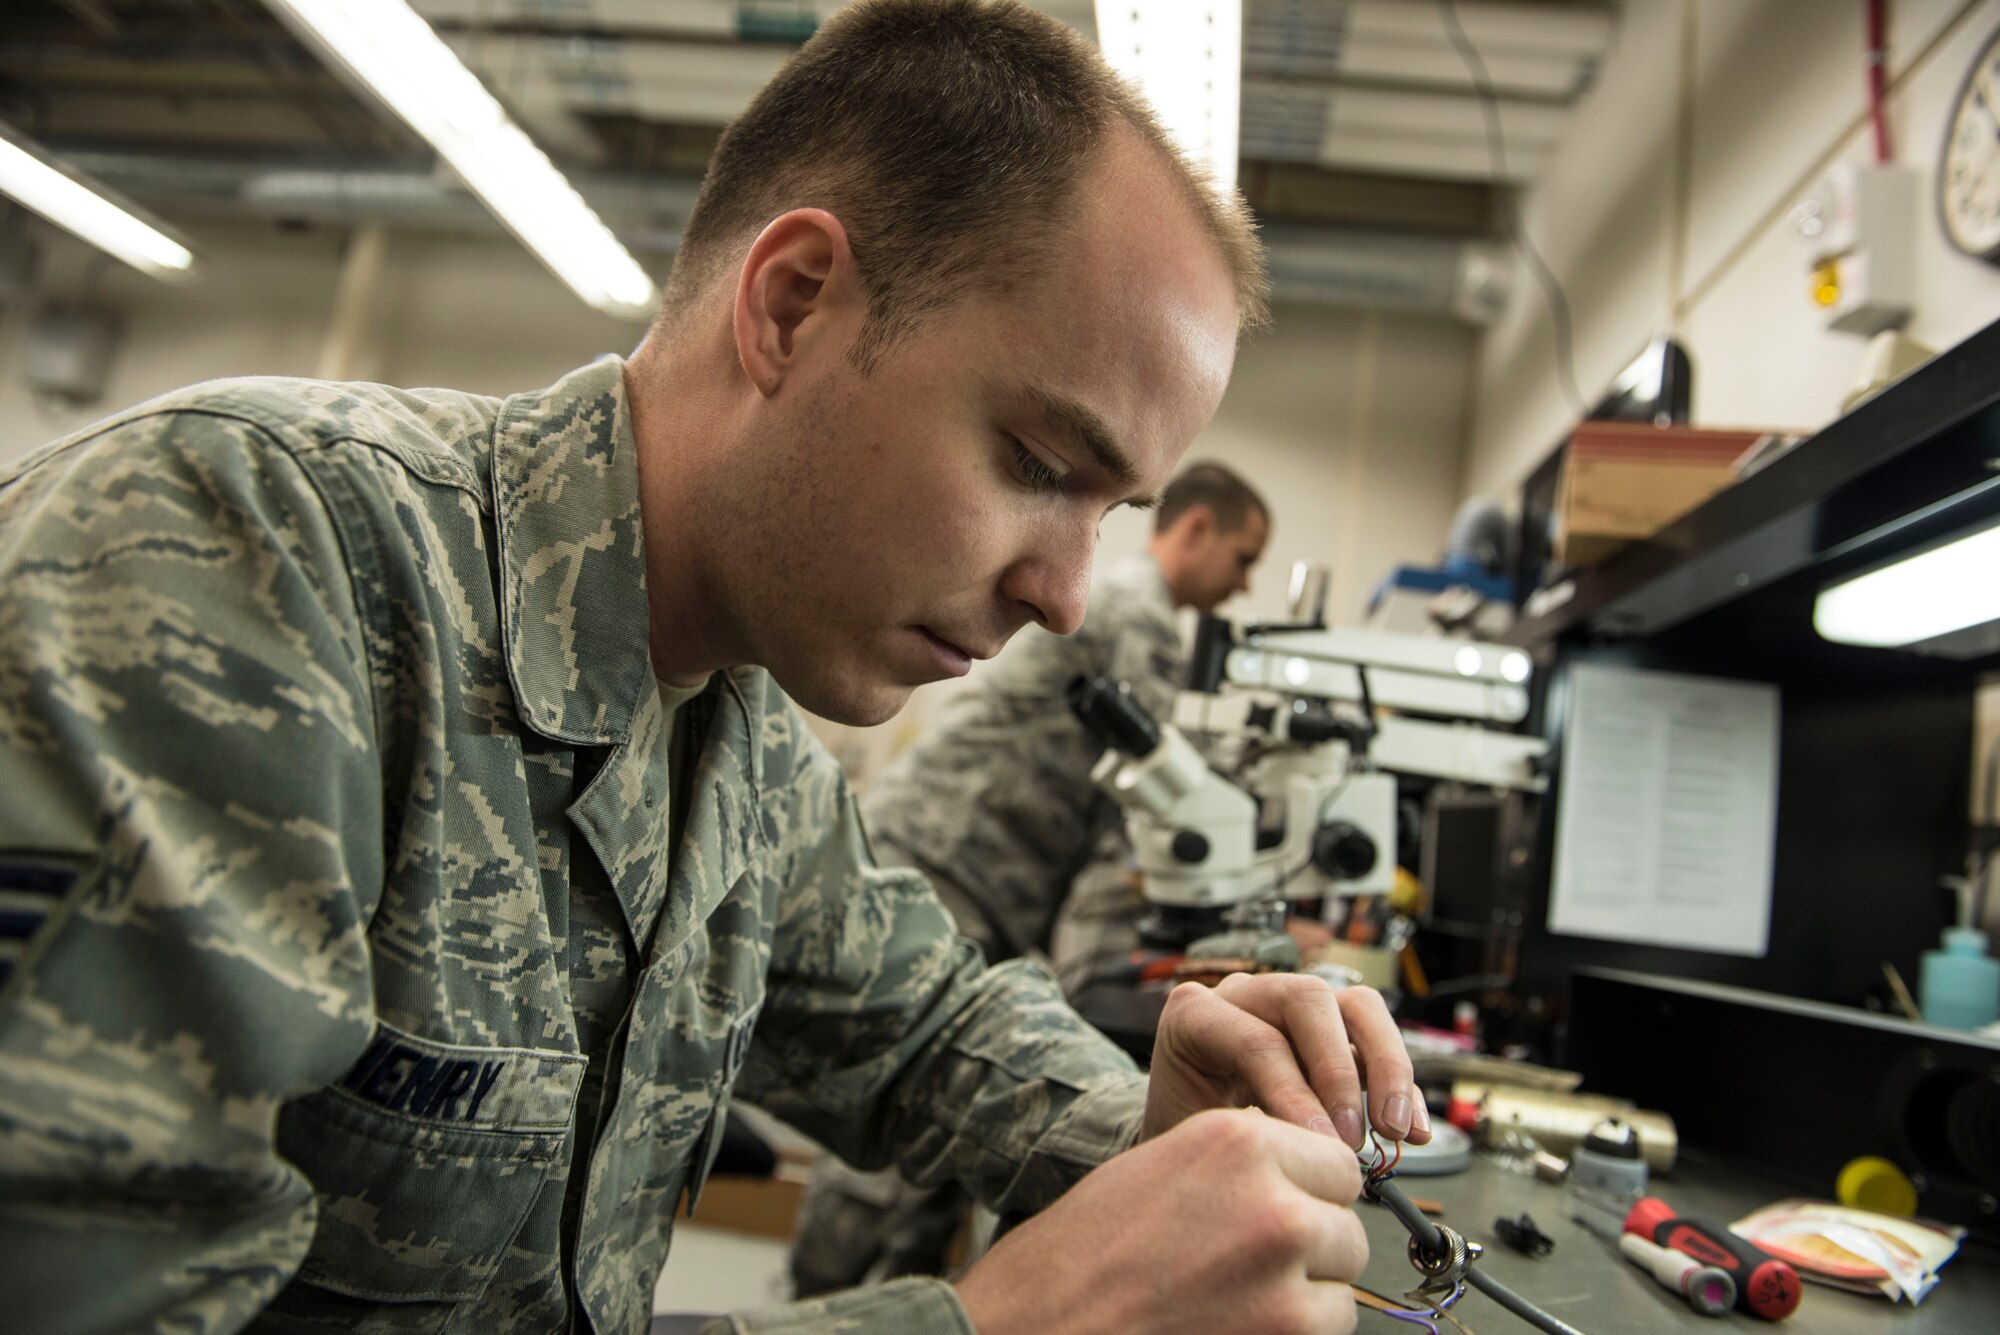 U.S. Air Force Staff Sgt. Brandon Henry, front, and Staff Sgt. Alexander Creznic, 20th Maintenance Group Air Force Repair Enhancement Program technicians, work on weight and balance kit cables at Shaw Air Force Base, S.C., April 20, 2018.